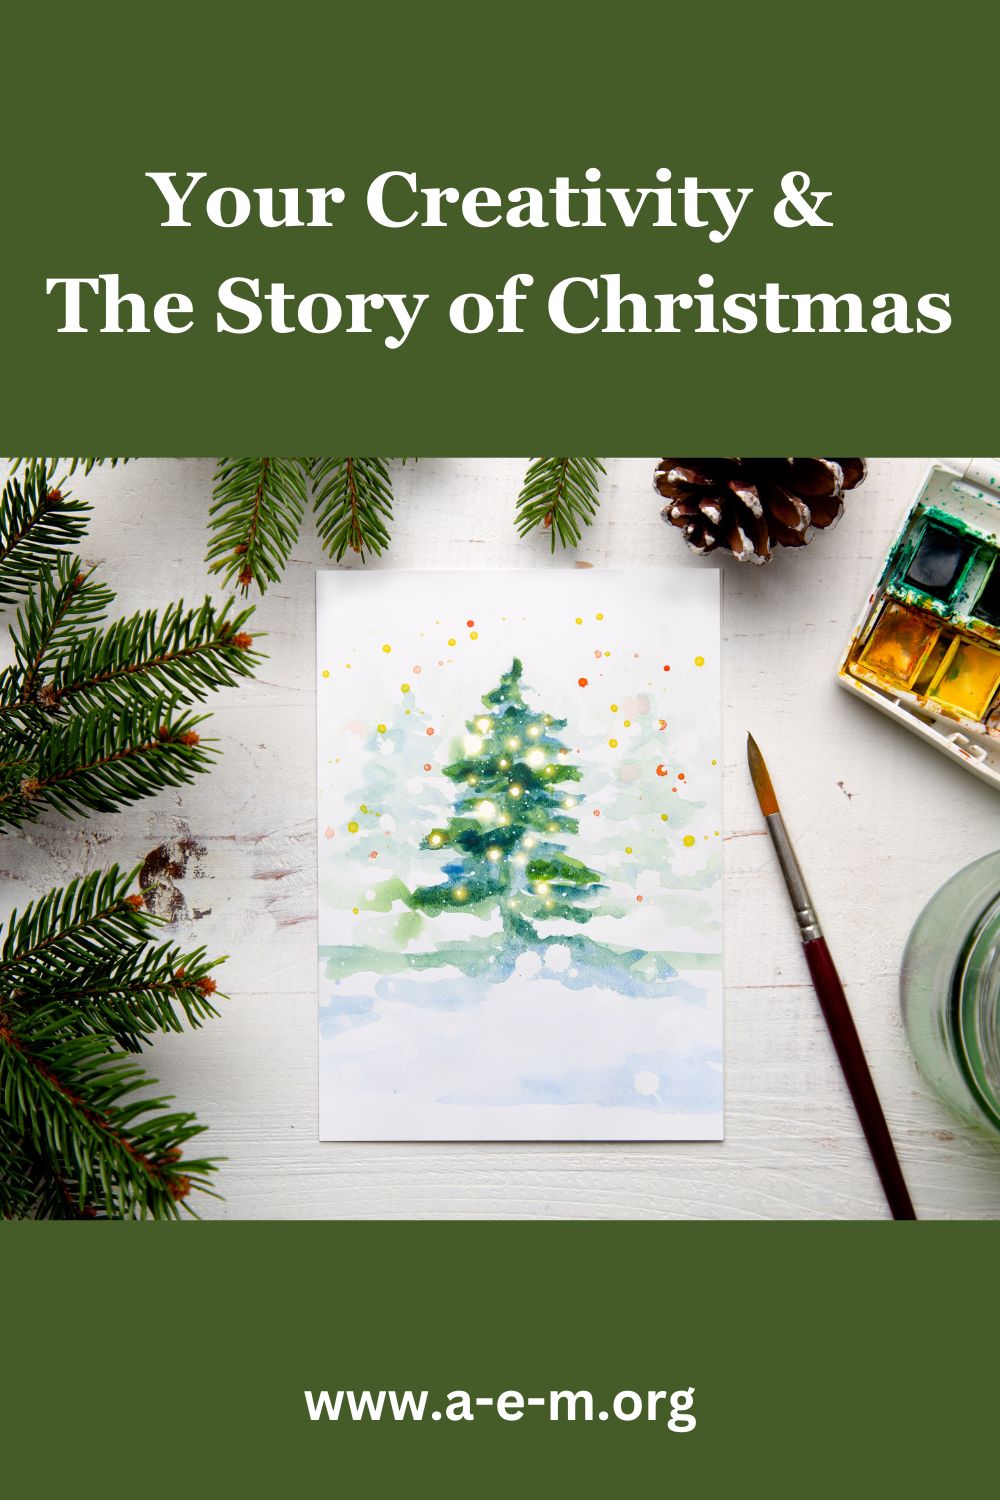 your creativity and the story of Christmas